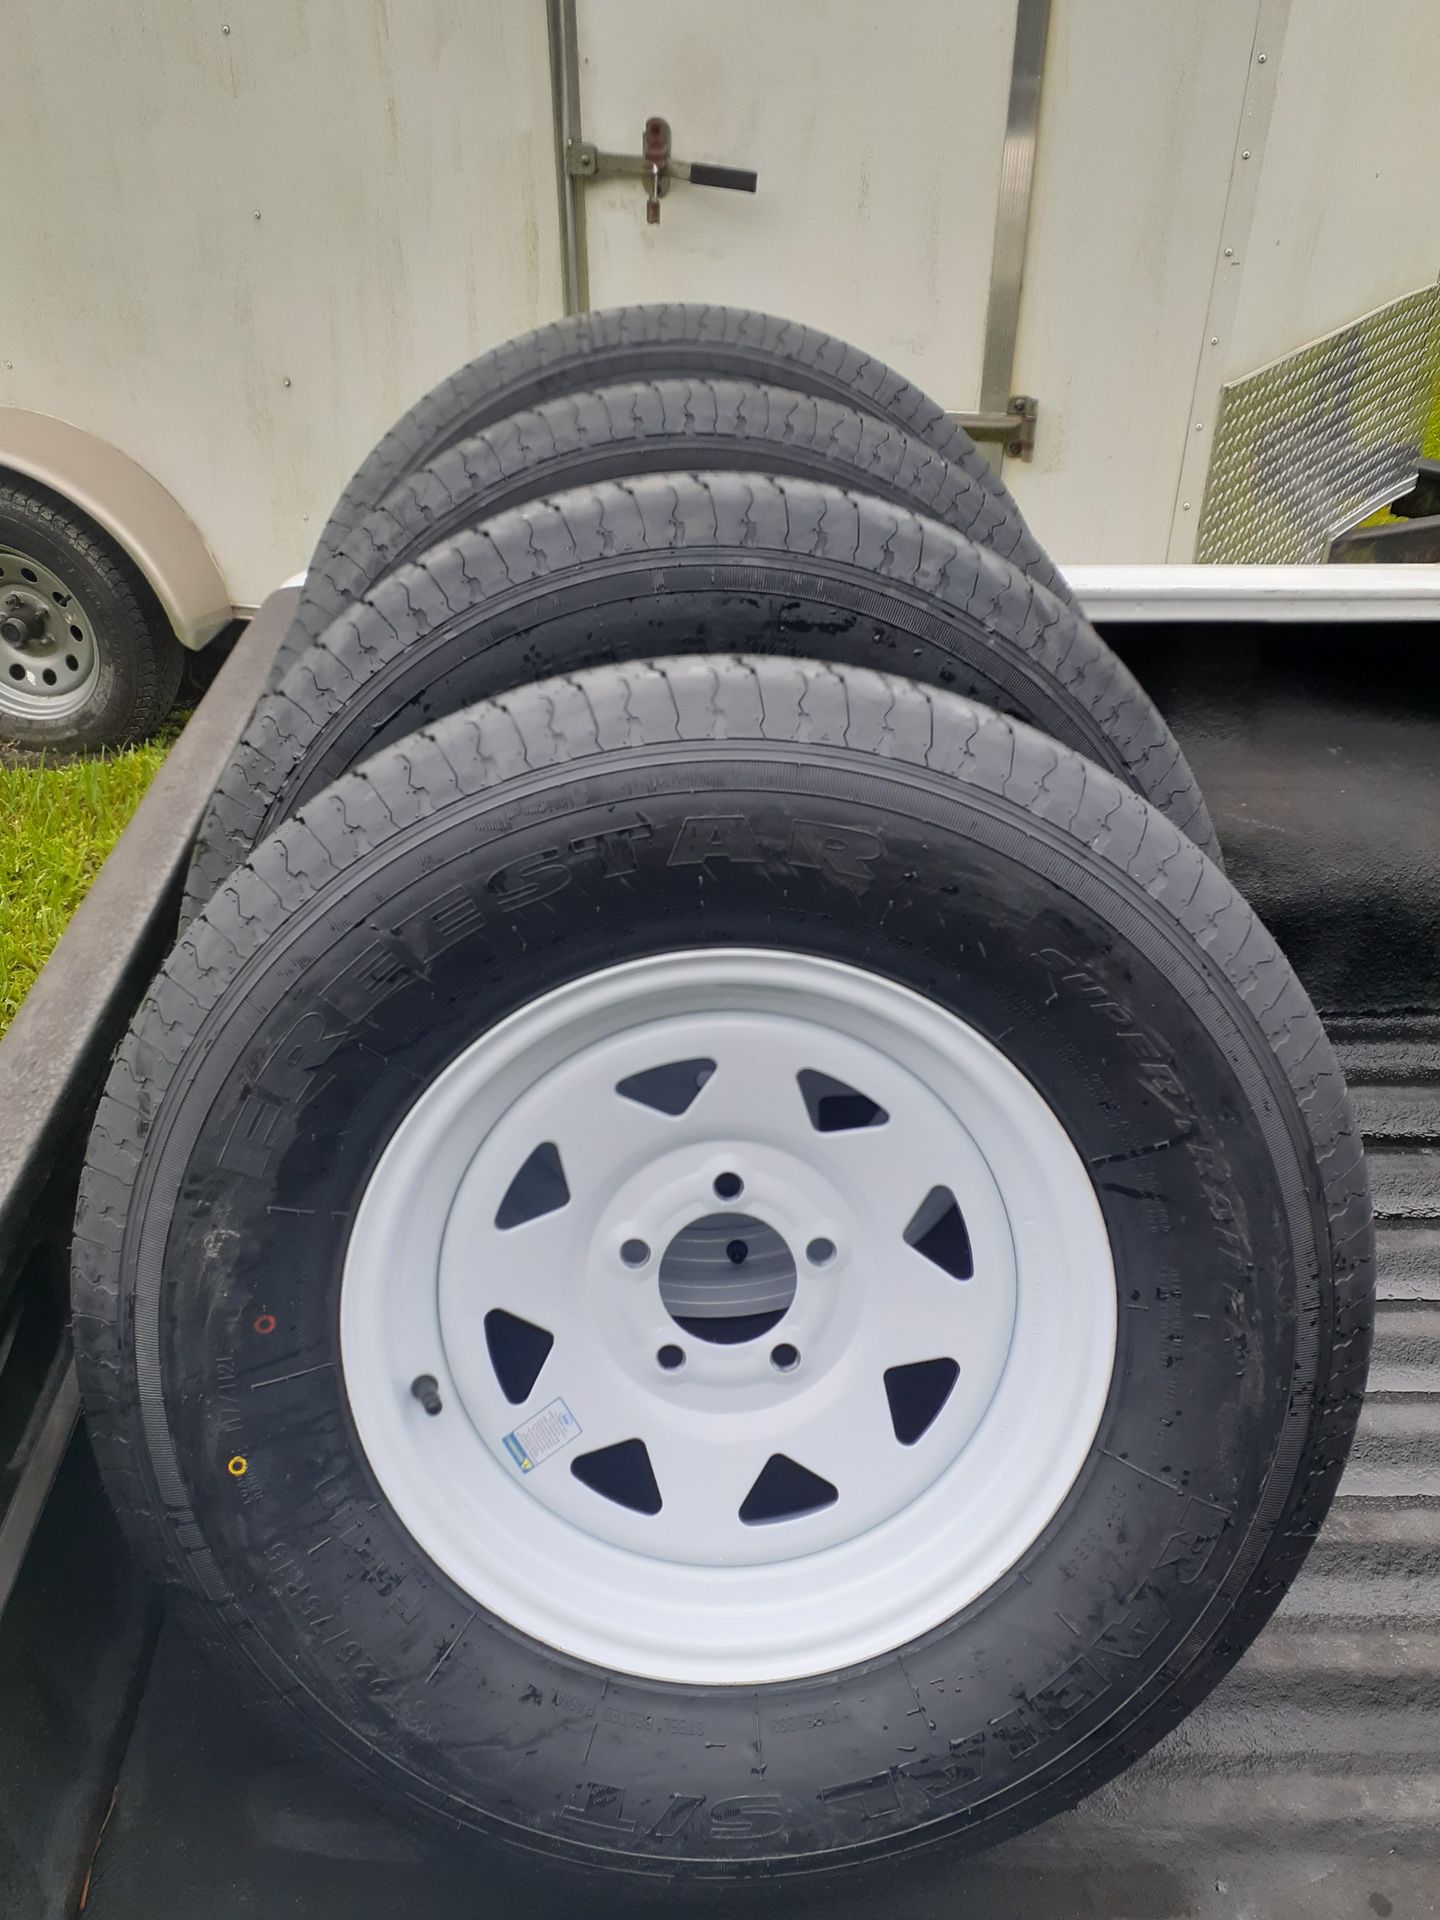 New trailer tires or wheels